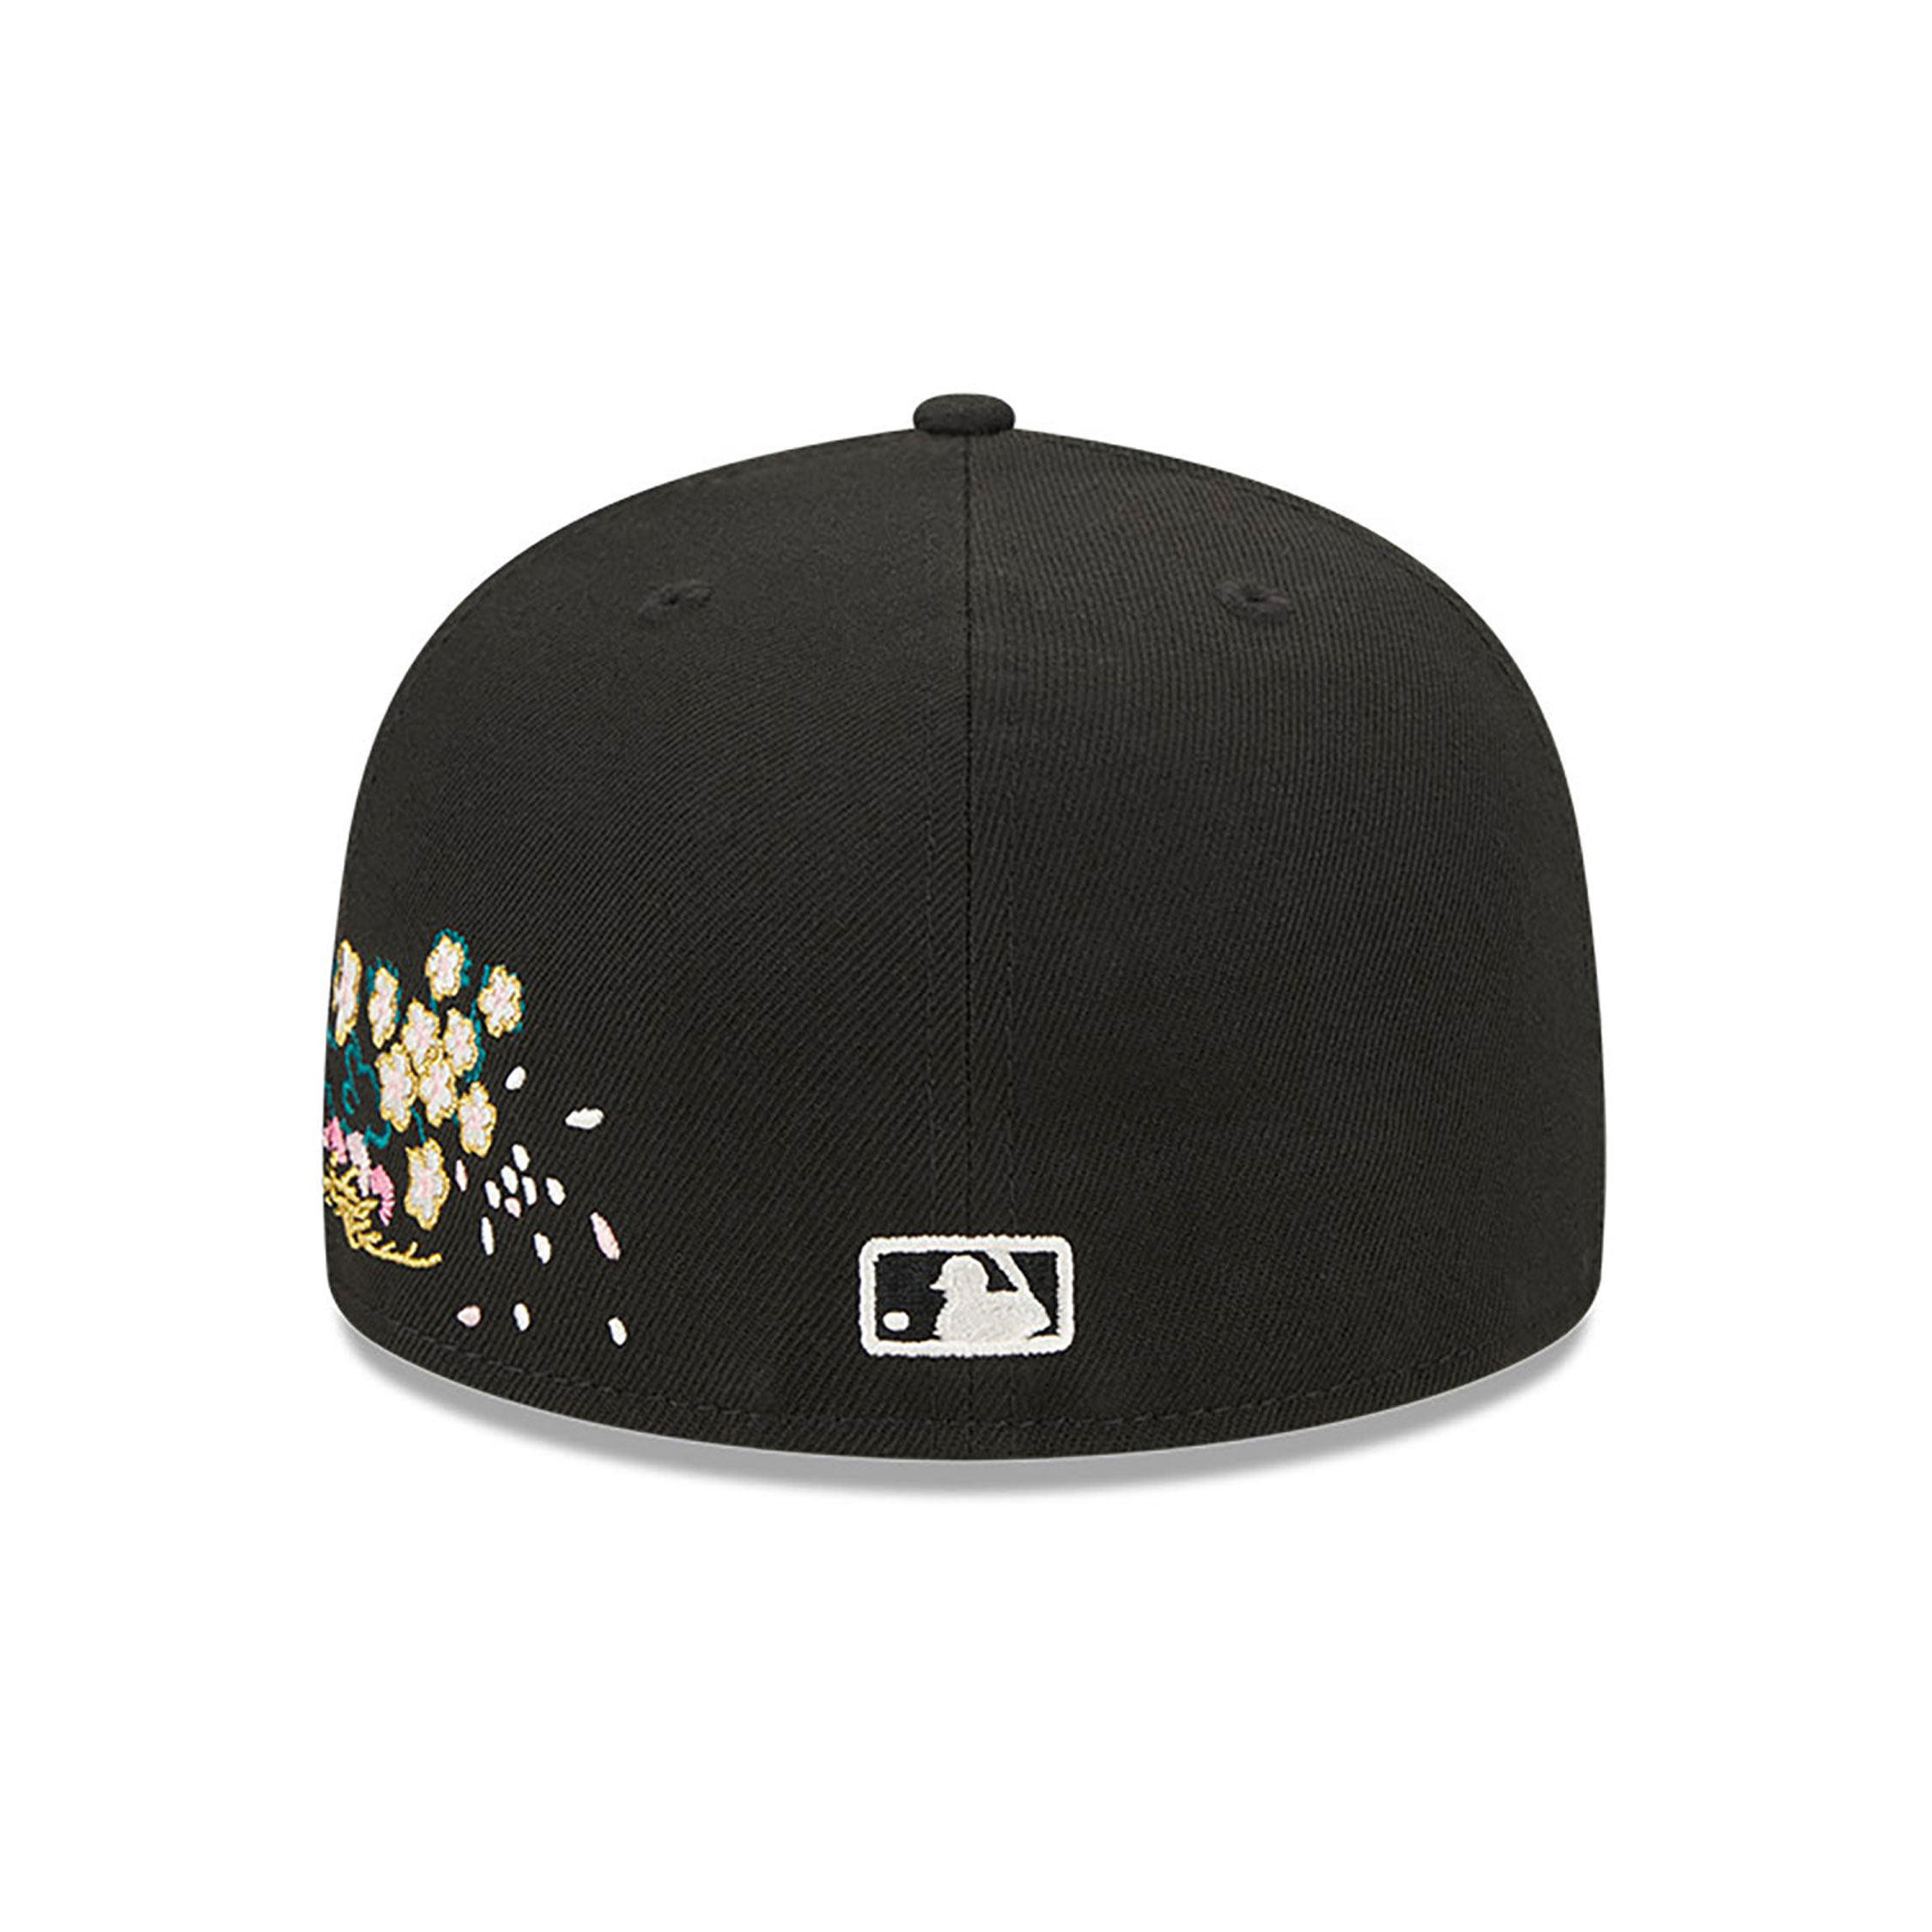 Washington Nationals Cherry Blossom Black 59FIFTY Fitted Cap